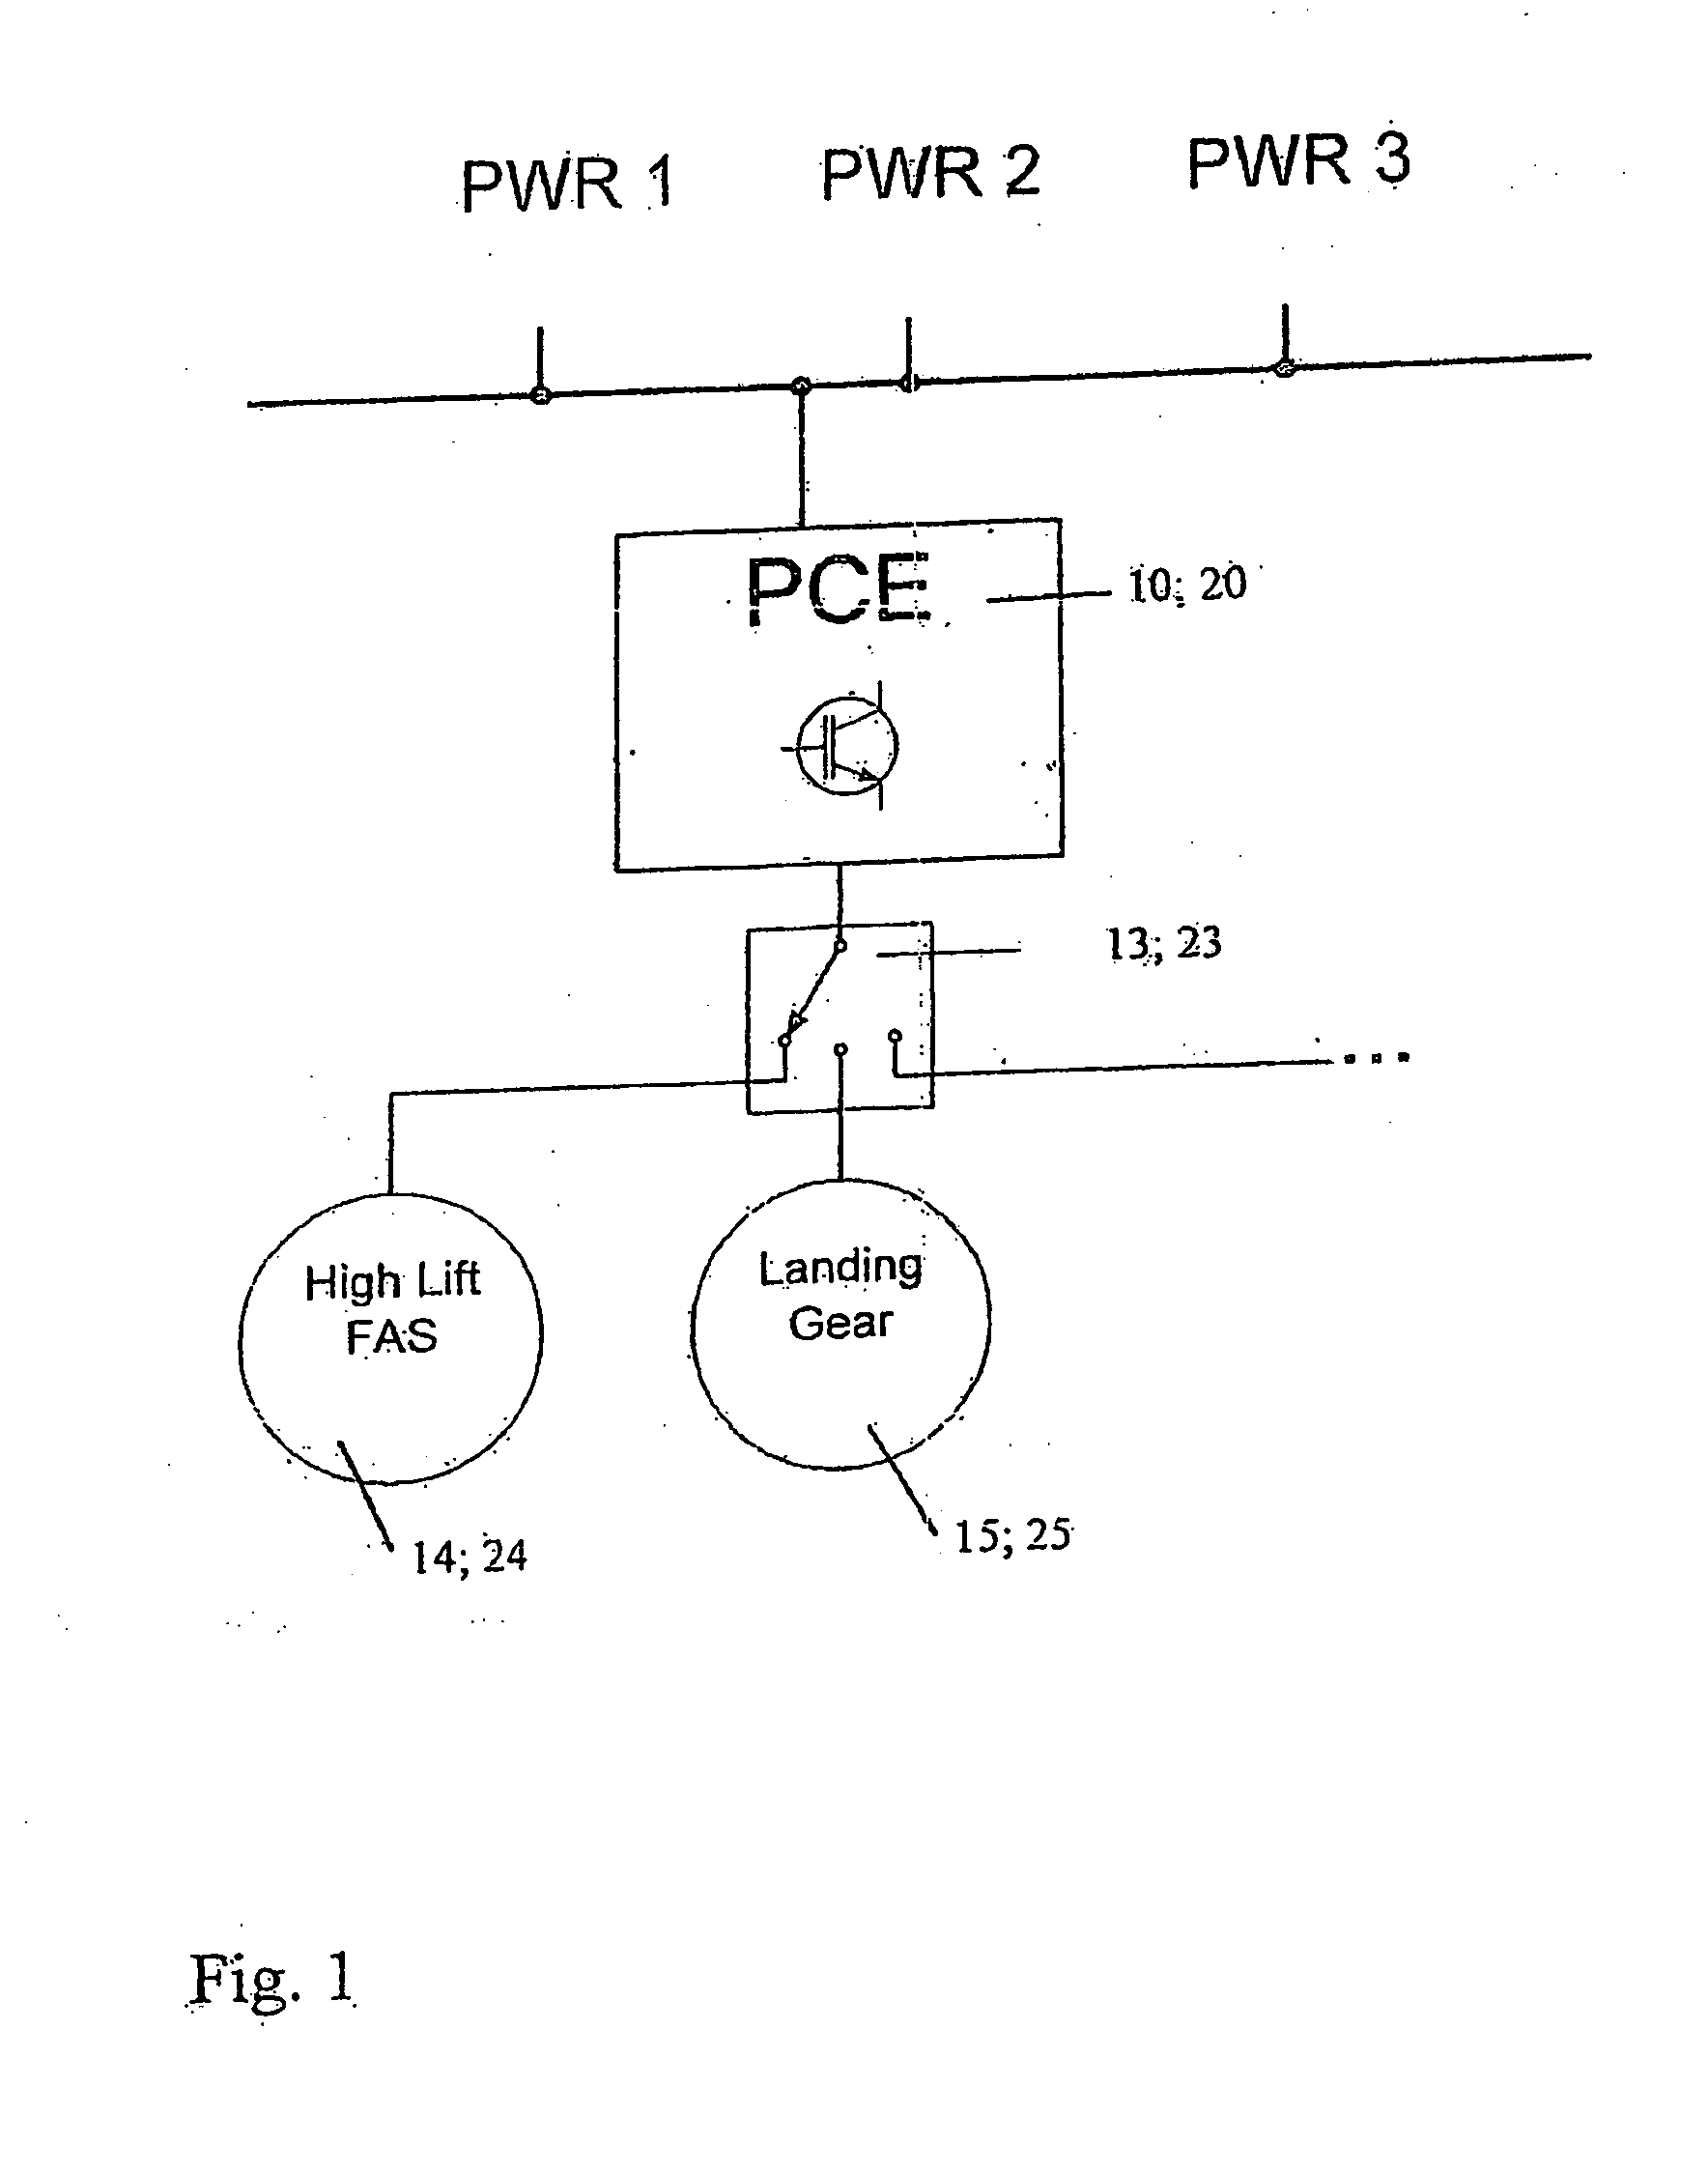 Method and Device for Redundantly Supplying Several Electric Servomotors or Drive Motors by Means of a Common Power Electronics Unit